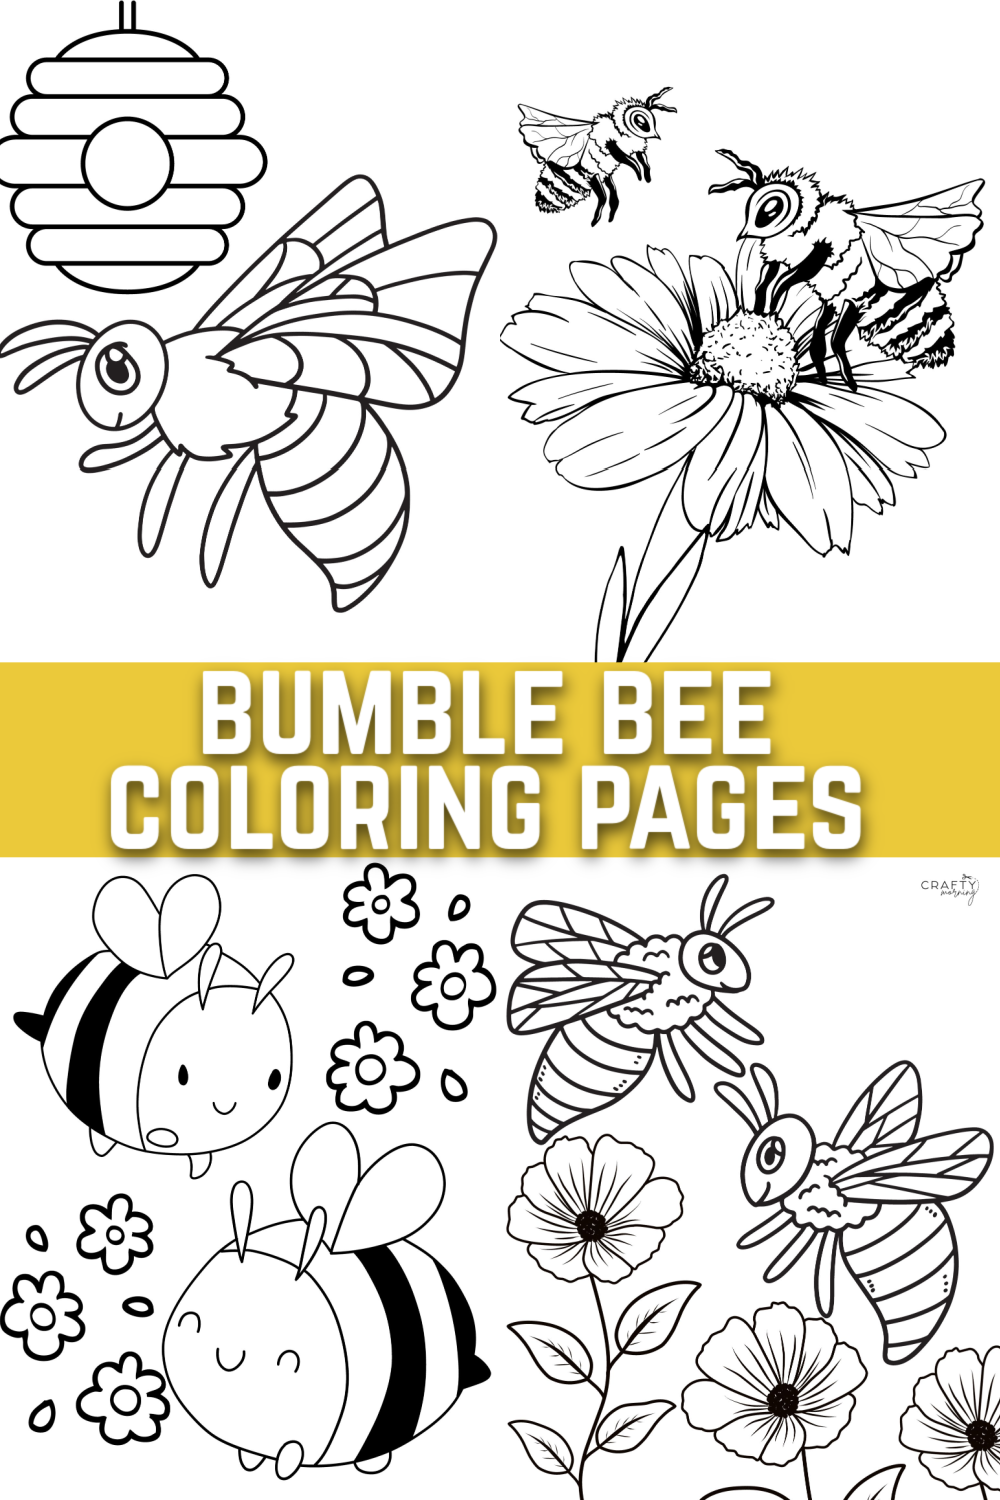 Bee Coloring Pages: Perfect for Homeschooling or Entertaining